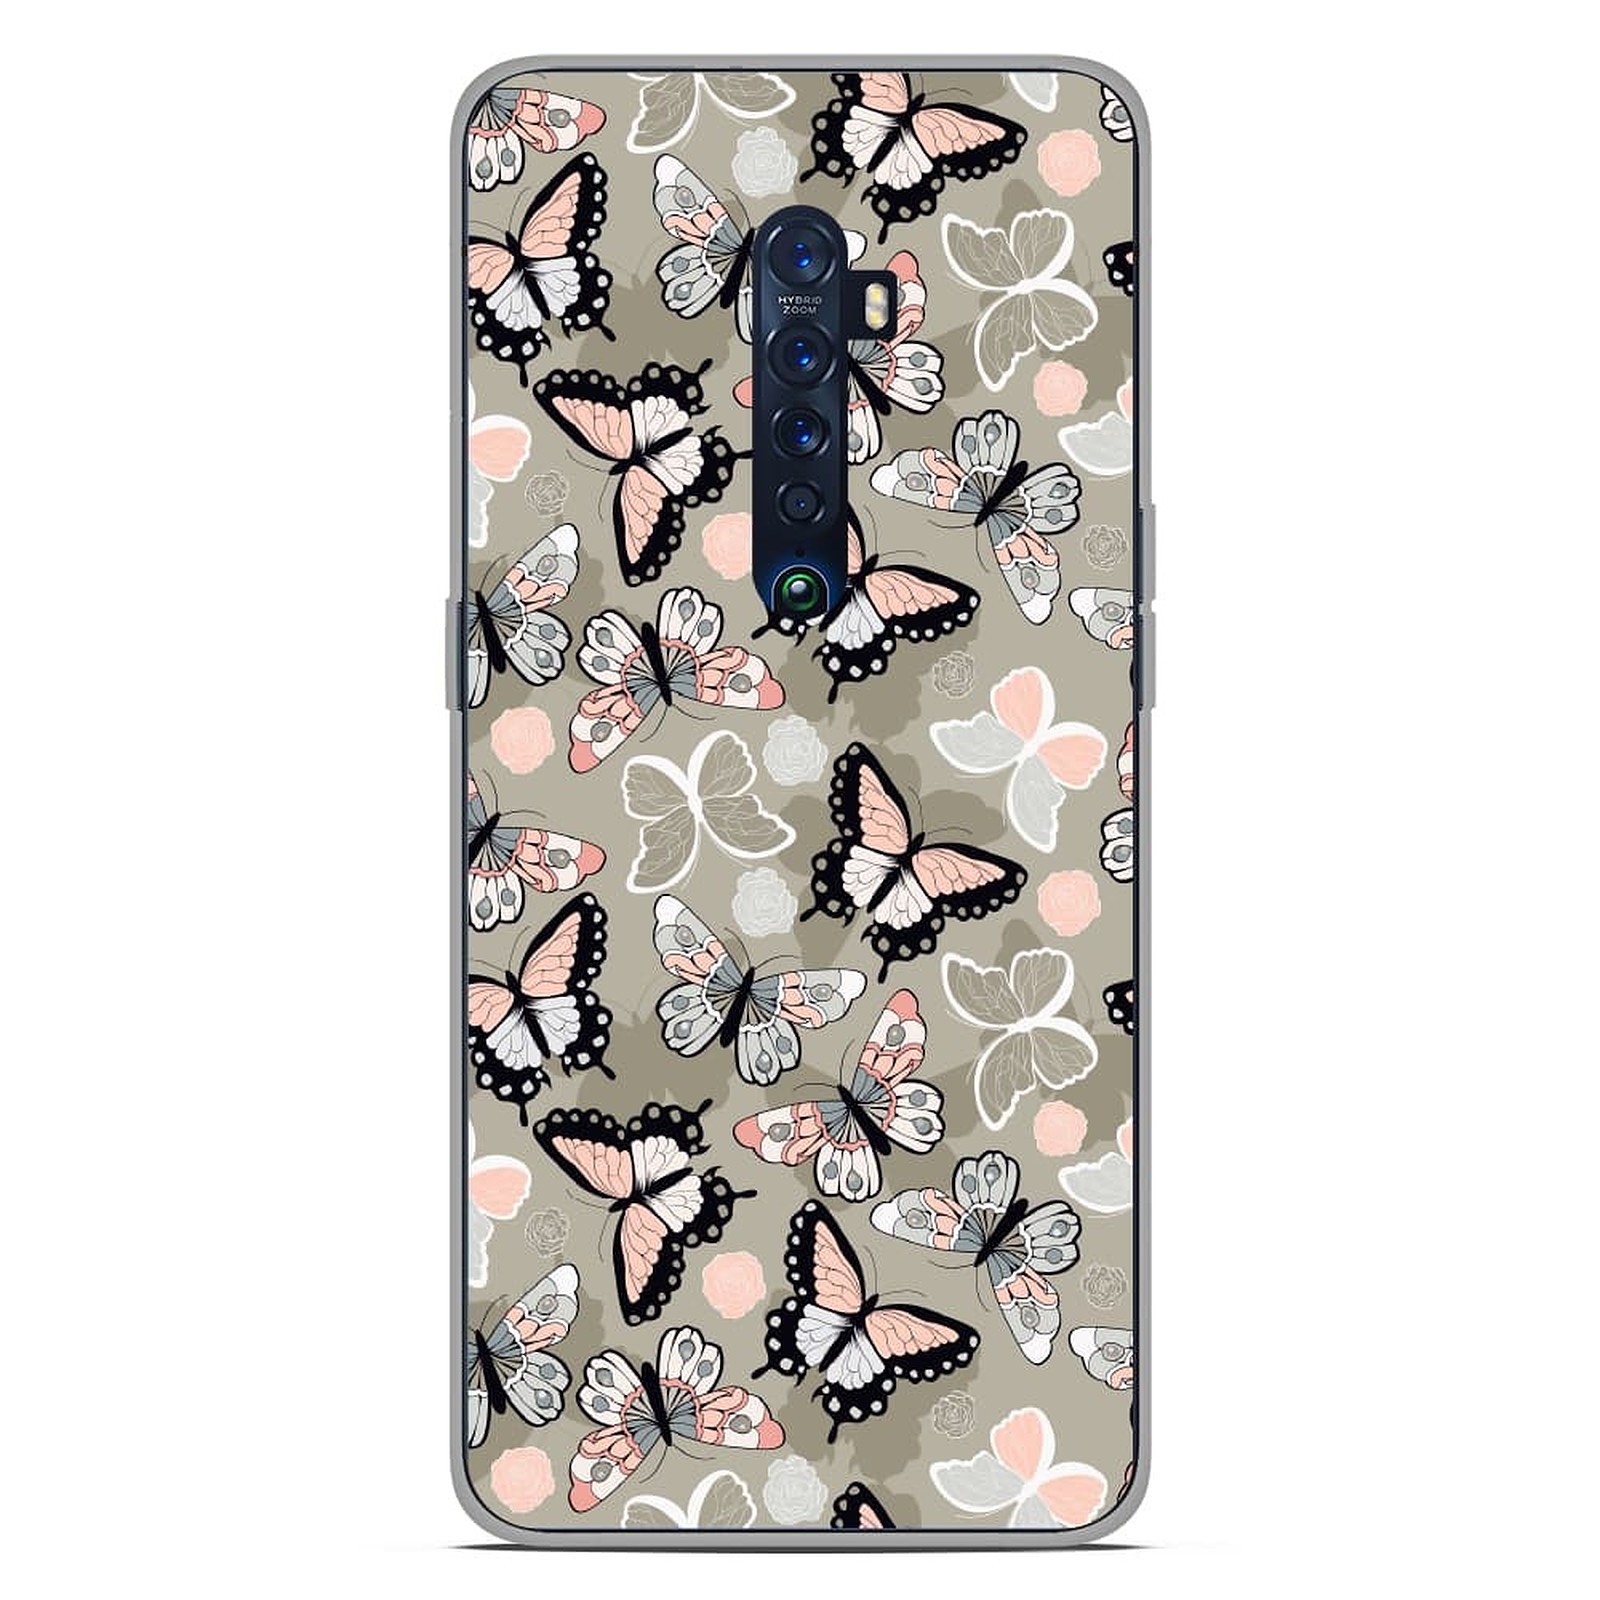 1001 Coques Coque silicone gel Oppo Reno 2 motif Papillons Vintage - Coque telephone 1001Coques